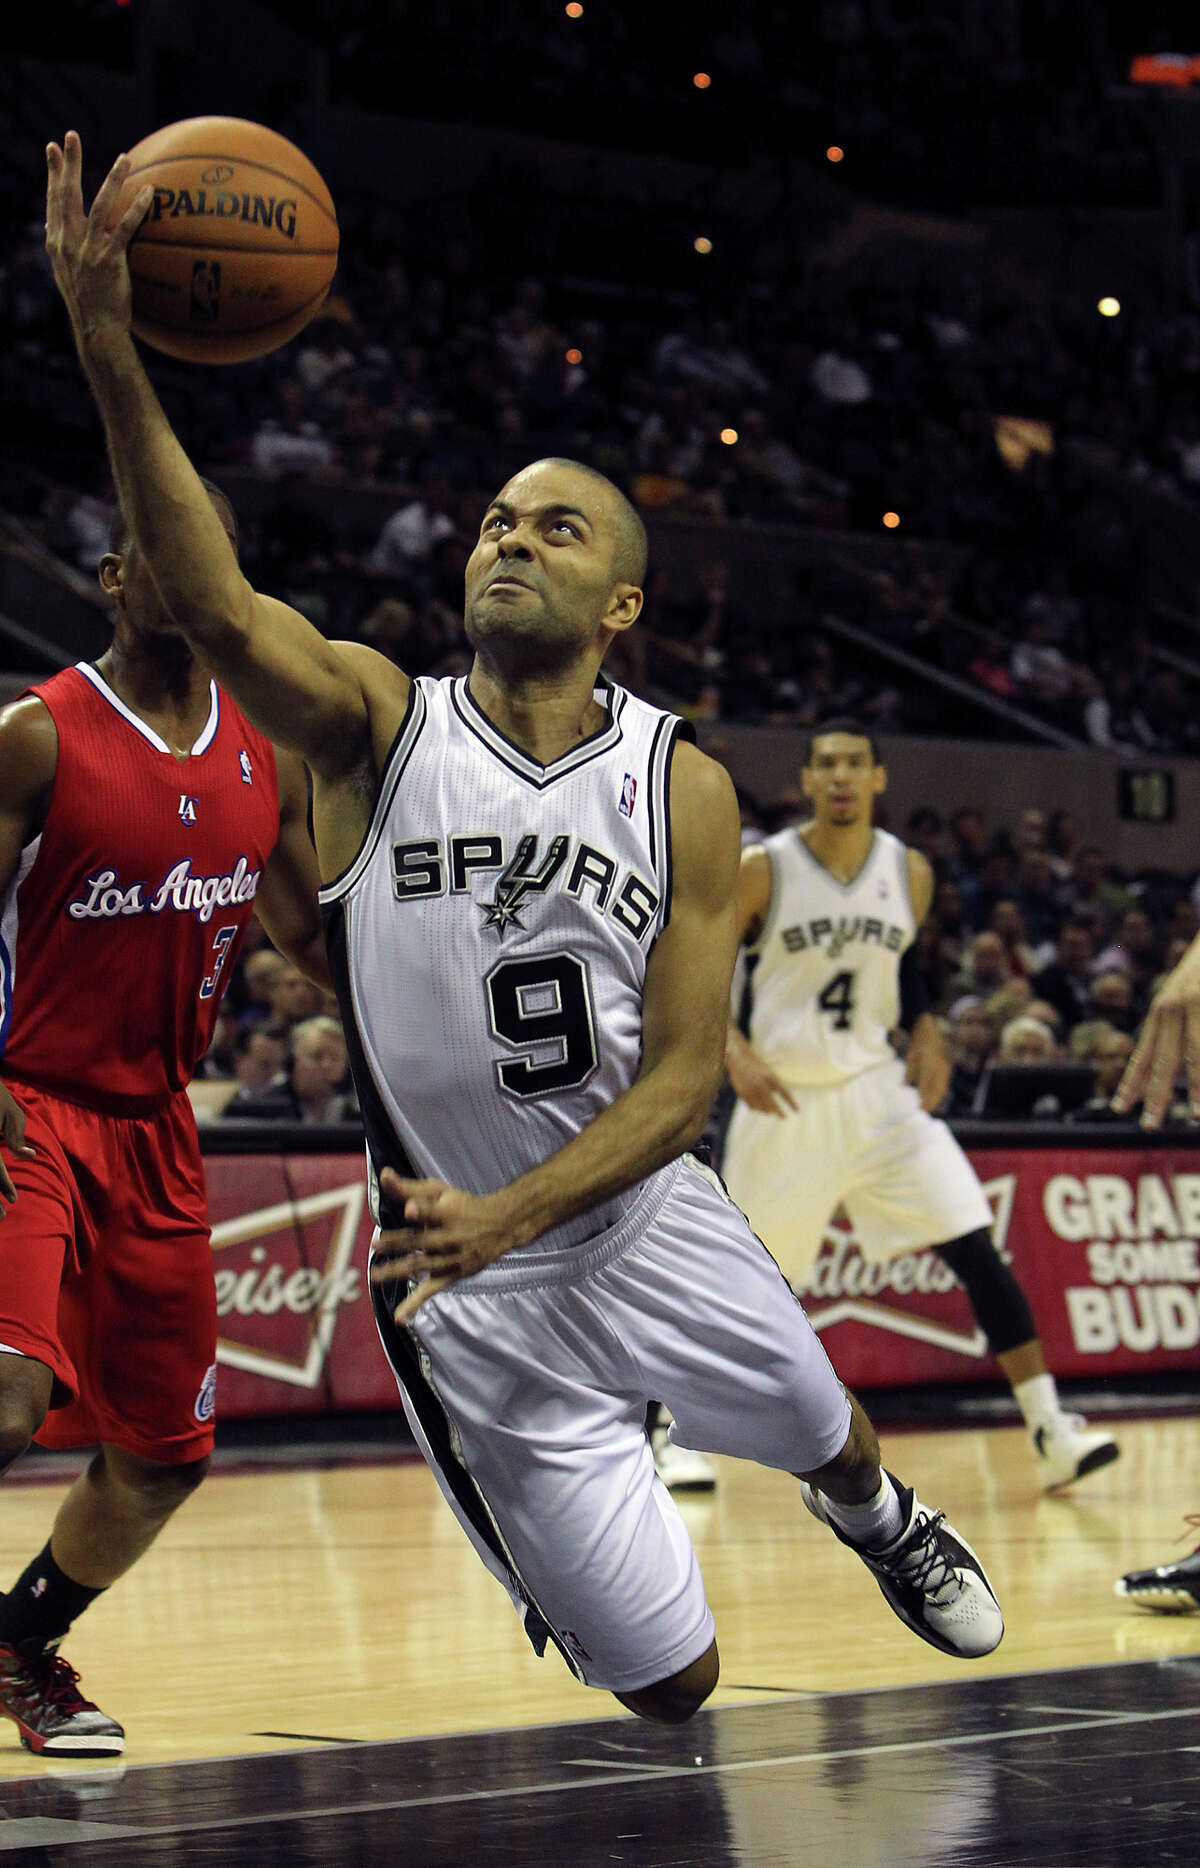 Spurs' Tony Parker spills toward the floor as he goes to make a shot against the Los Angeles Clippers in the first half of their game at the AT&T Center on Monday, Nov. 19, 2012.